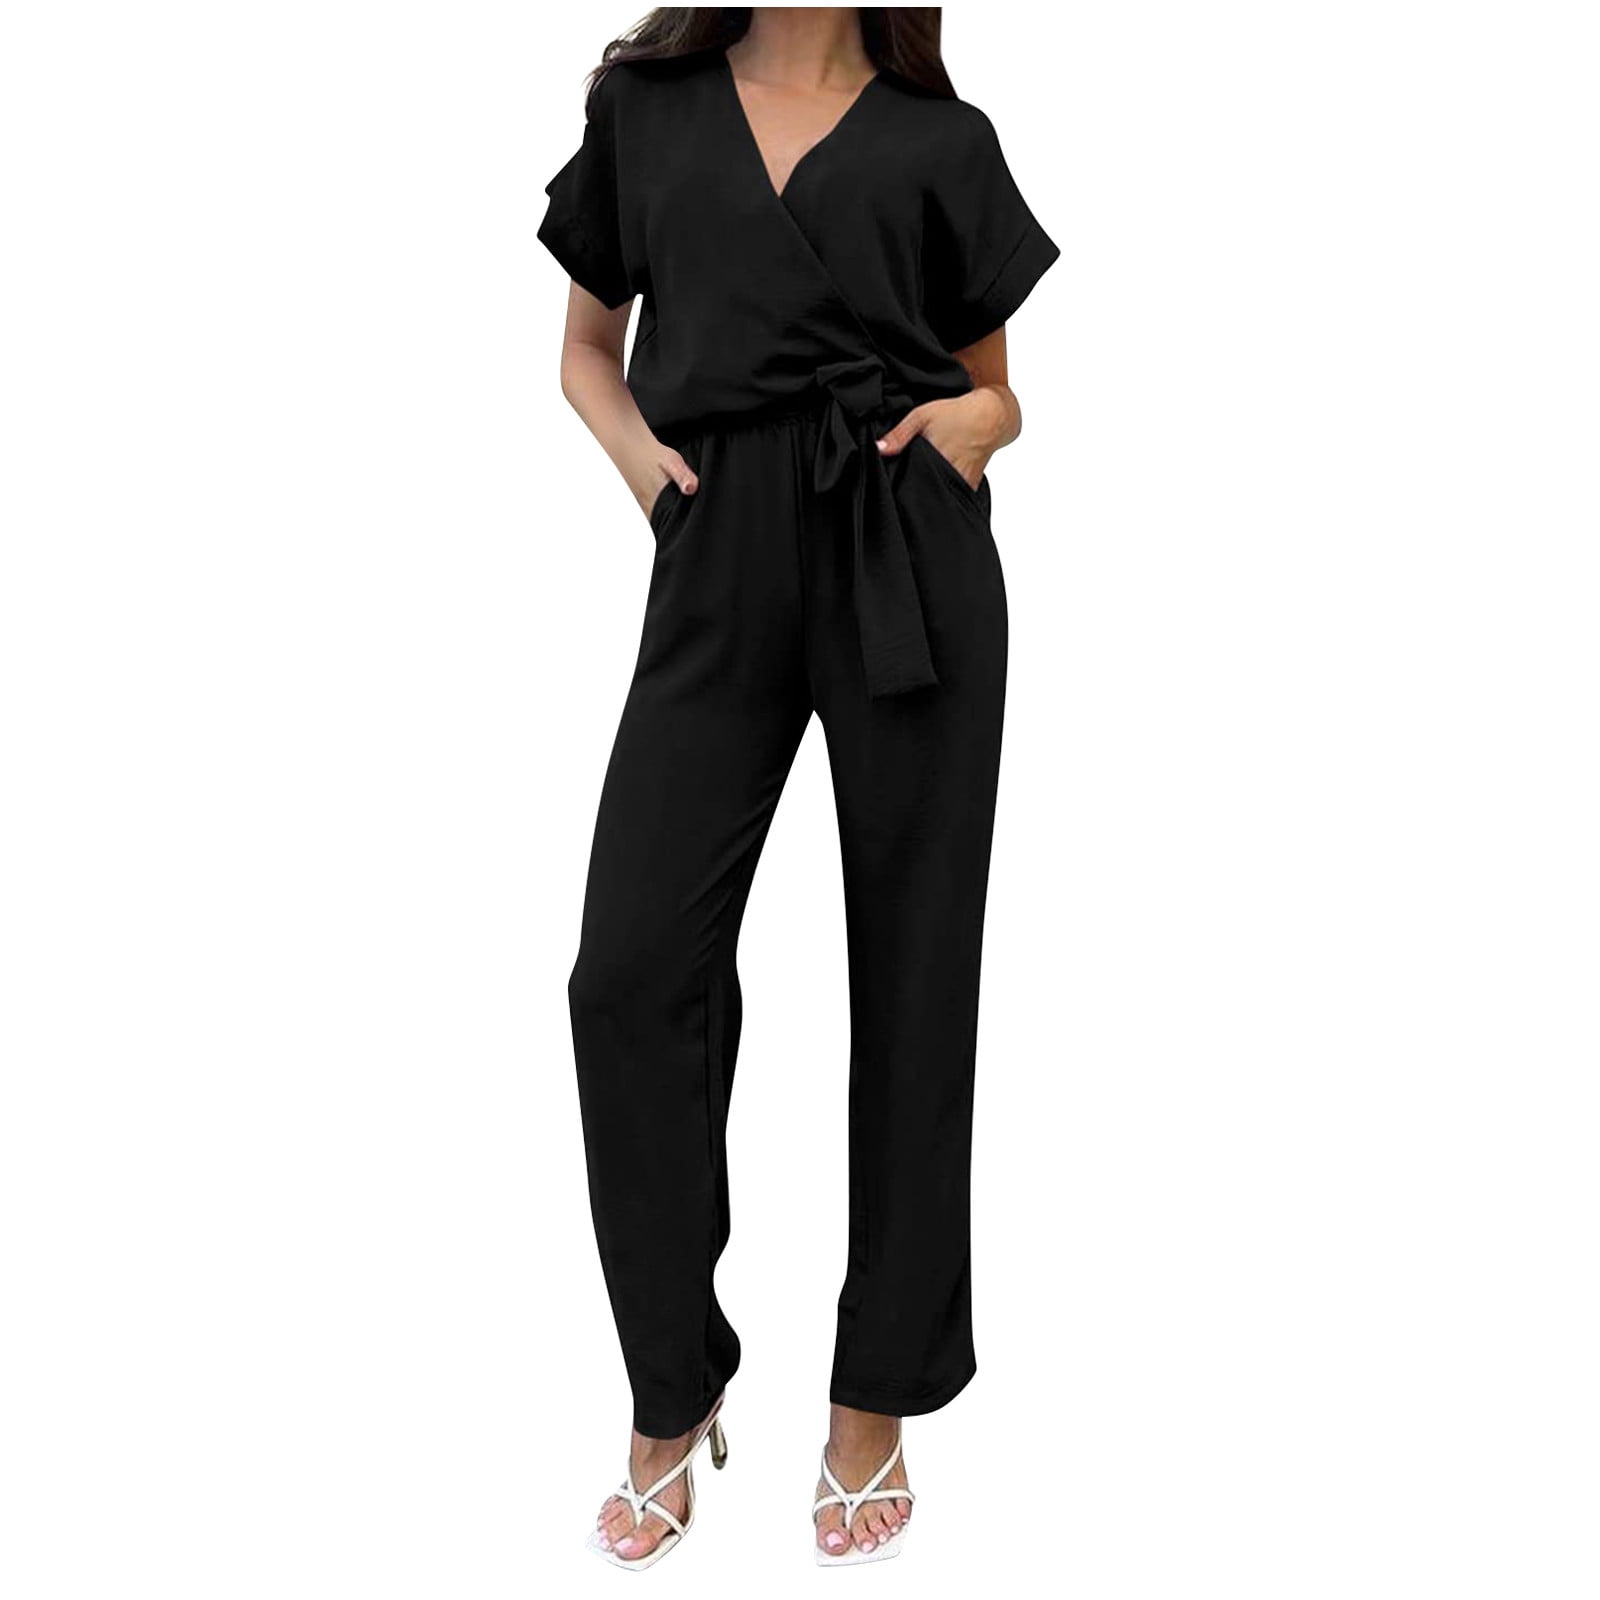 Romper for Women Summer V Neck Spaghetti Straps Wide Leg Pants Jumpsuit  Casual Loose Flowy Beach Holiday Rompers Ladies Clothes - Walmart.com